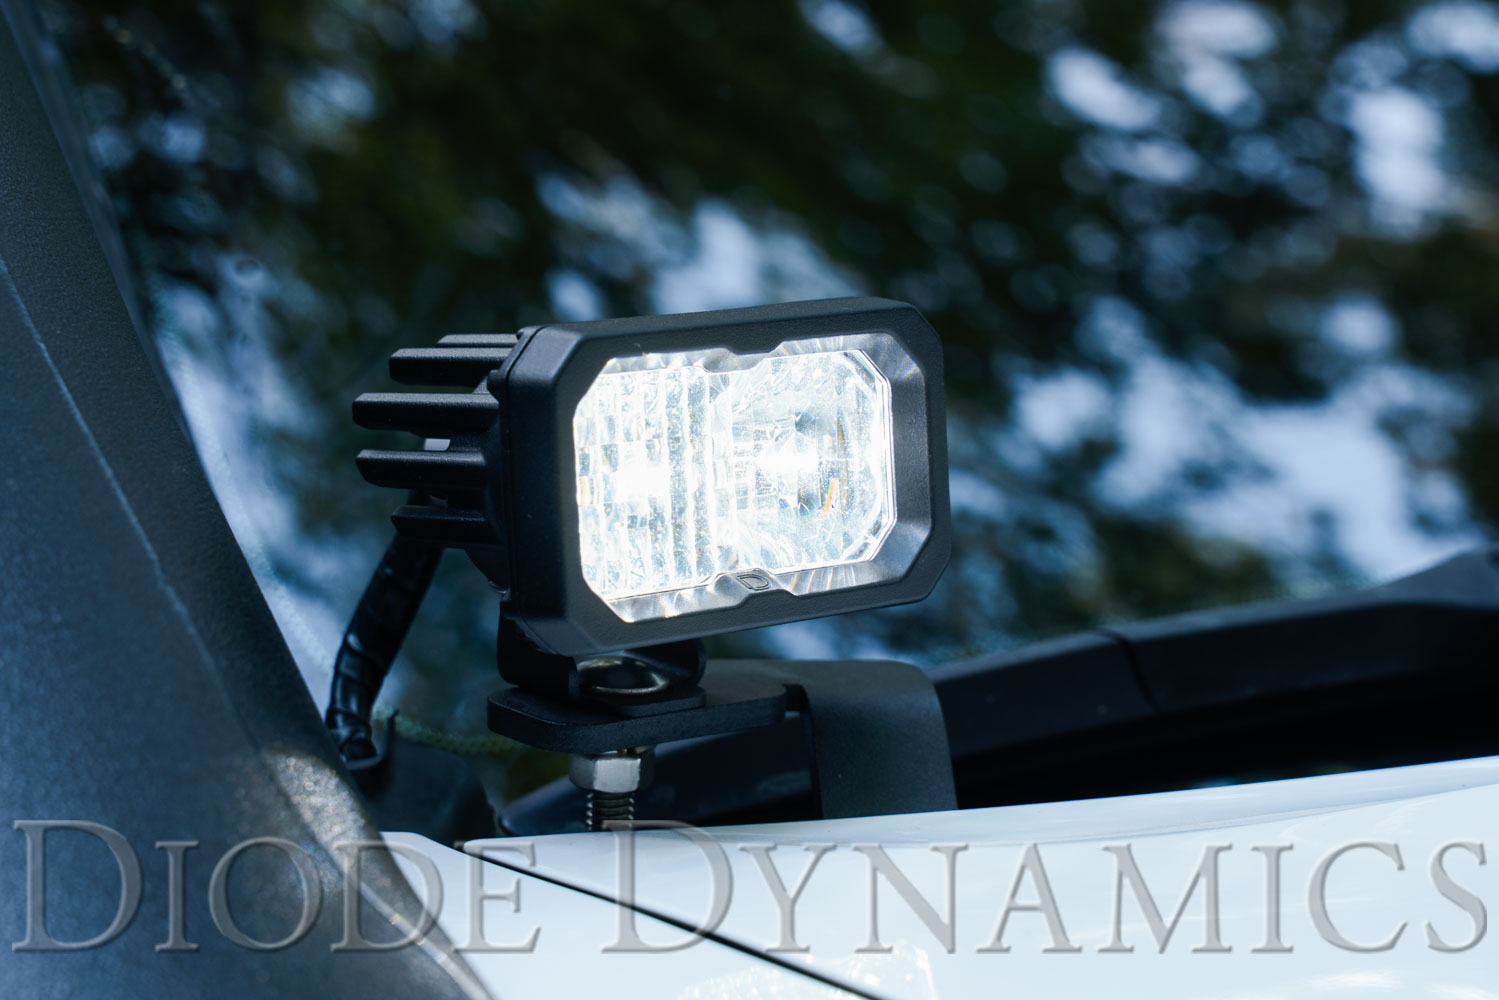 Diode Dynamics Stage Series 2 Inch LED Pod, Pro White Spot Standard BBL Pair